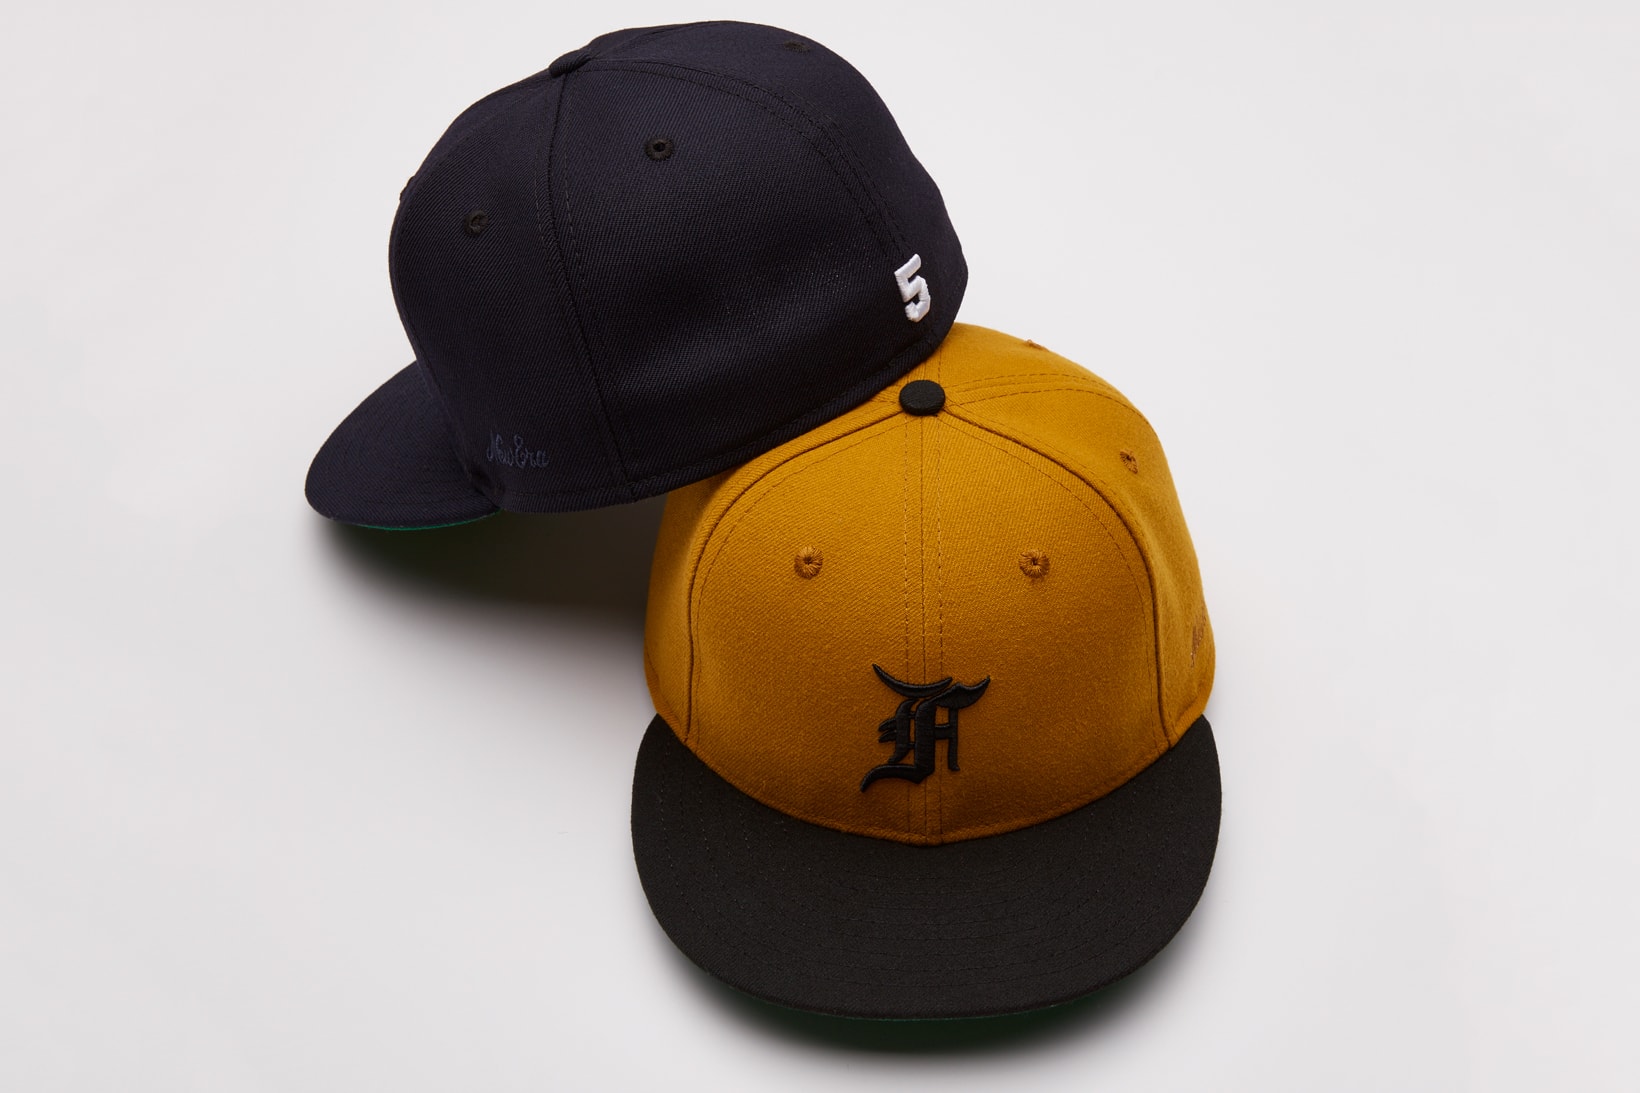 New Era Cap - Rep Houston culture in style with the